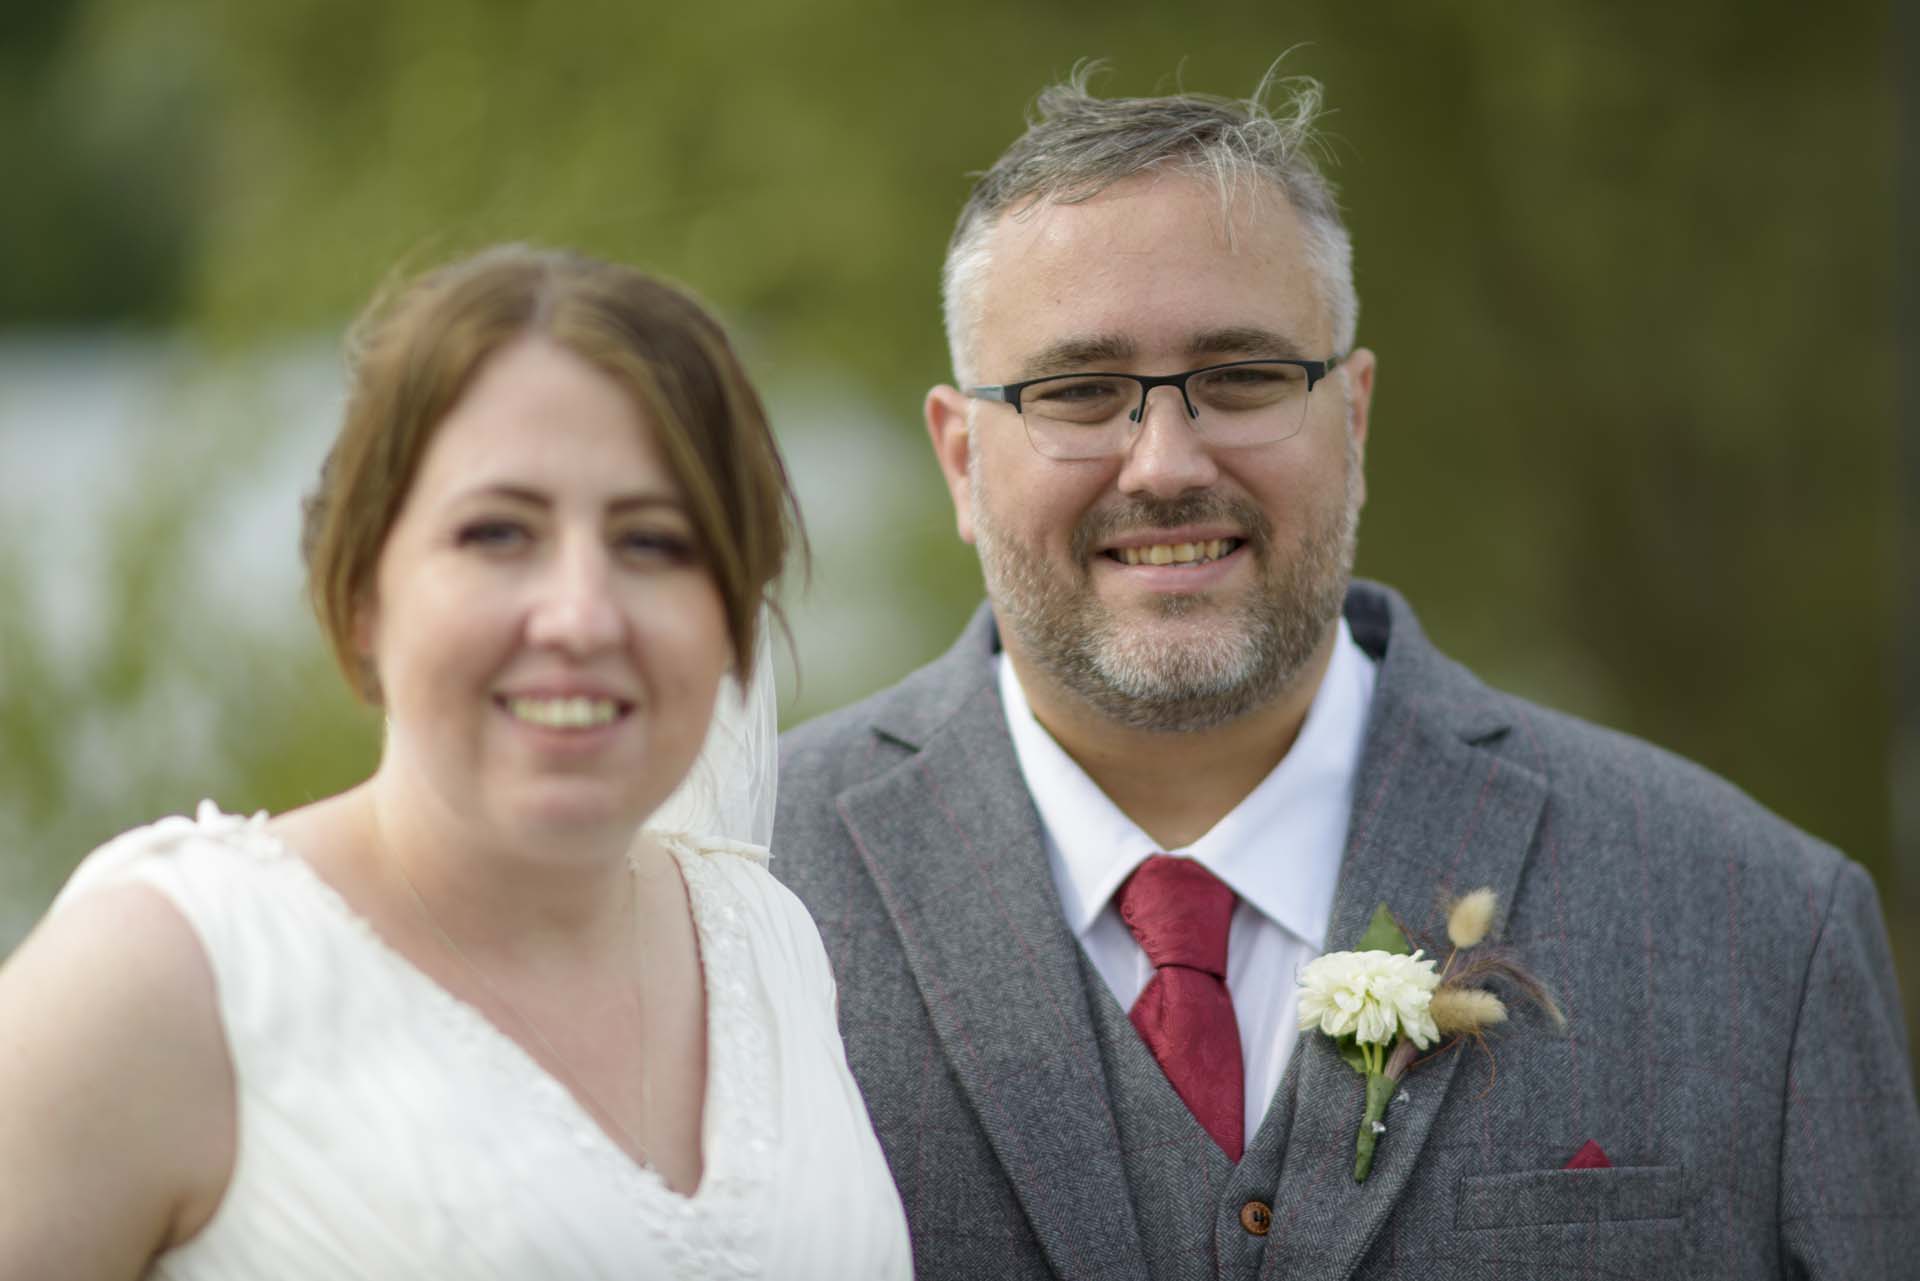 London wedding photographer working in Doncaster 135mm f2